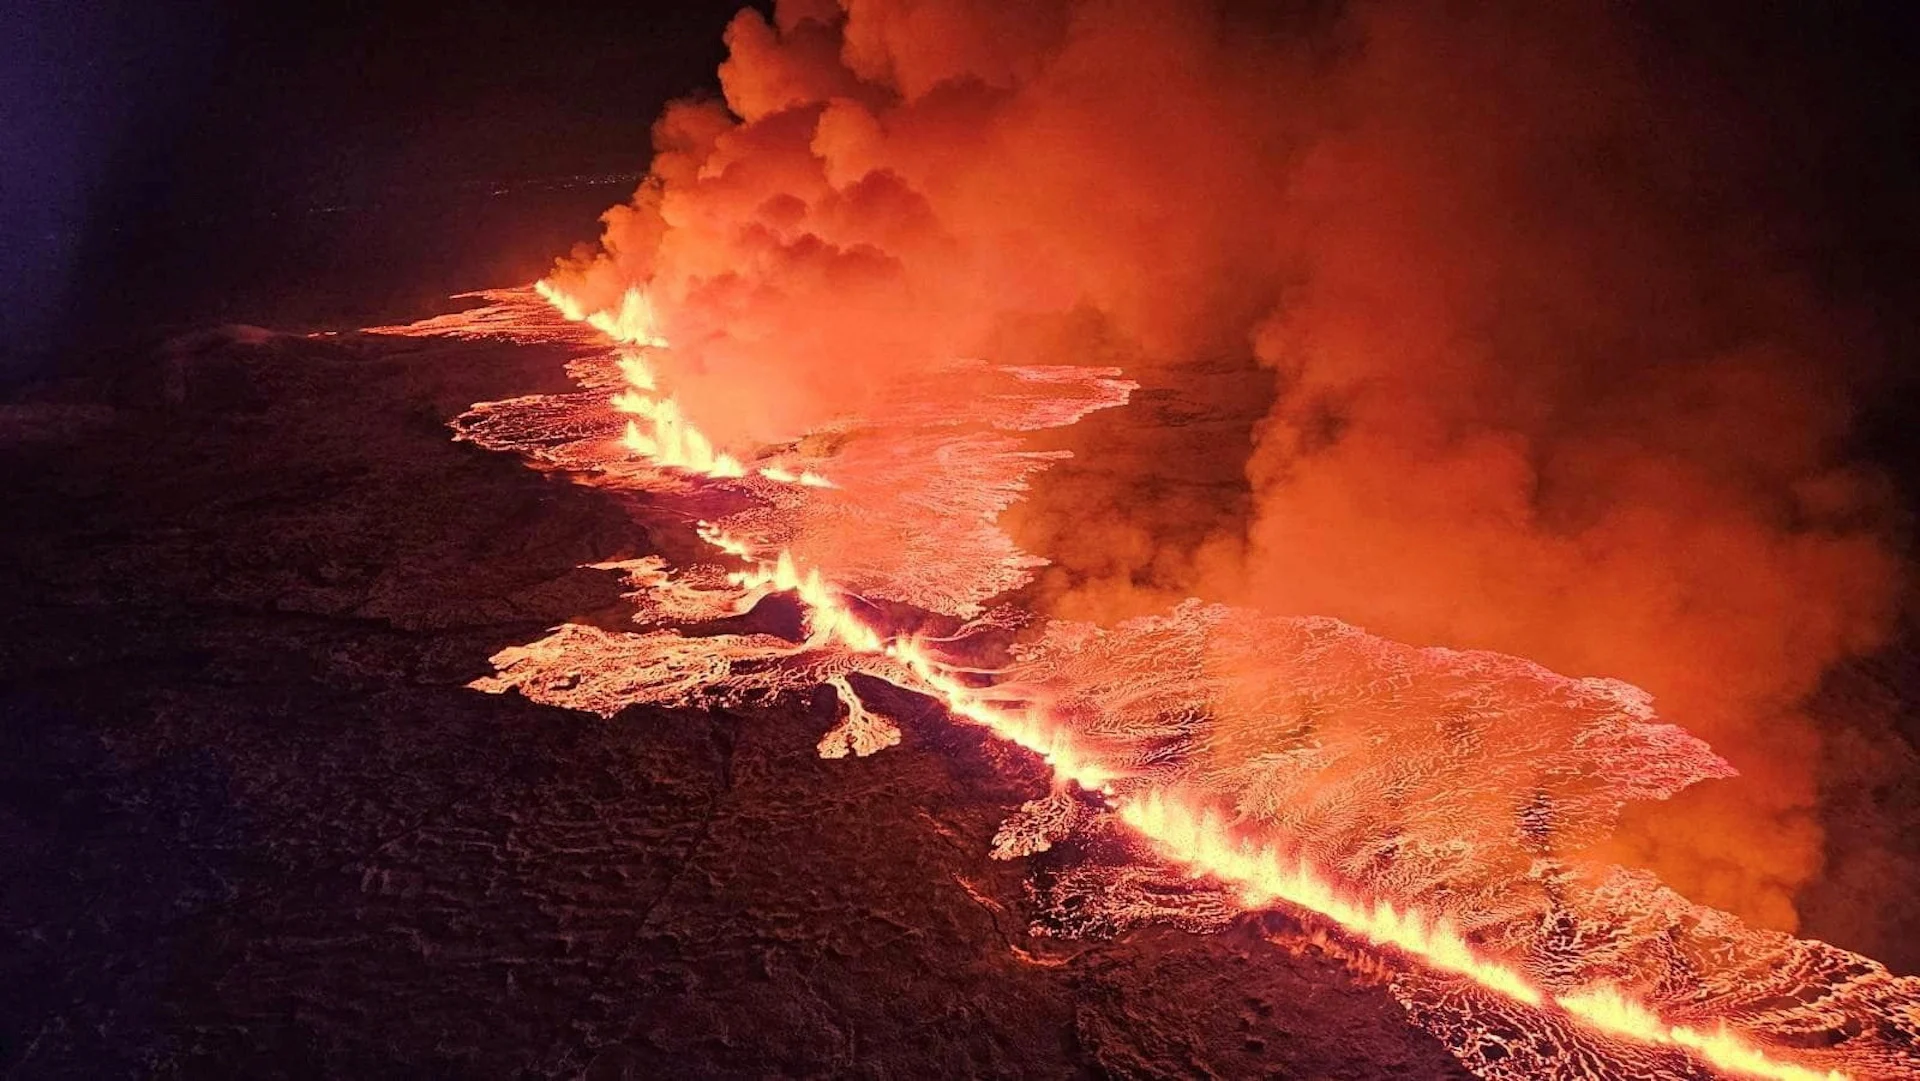 ICELAND-VOLCANO/ Civil Protection of Iceland/Handout via REUTERS